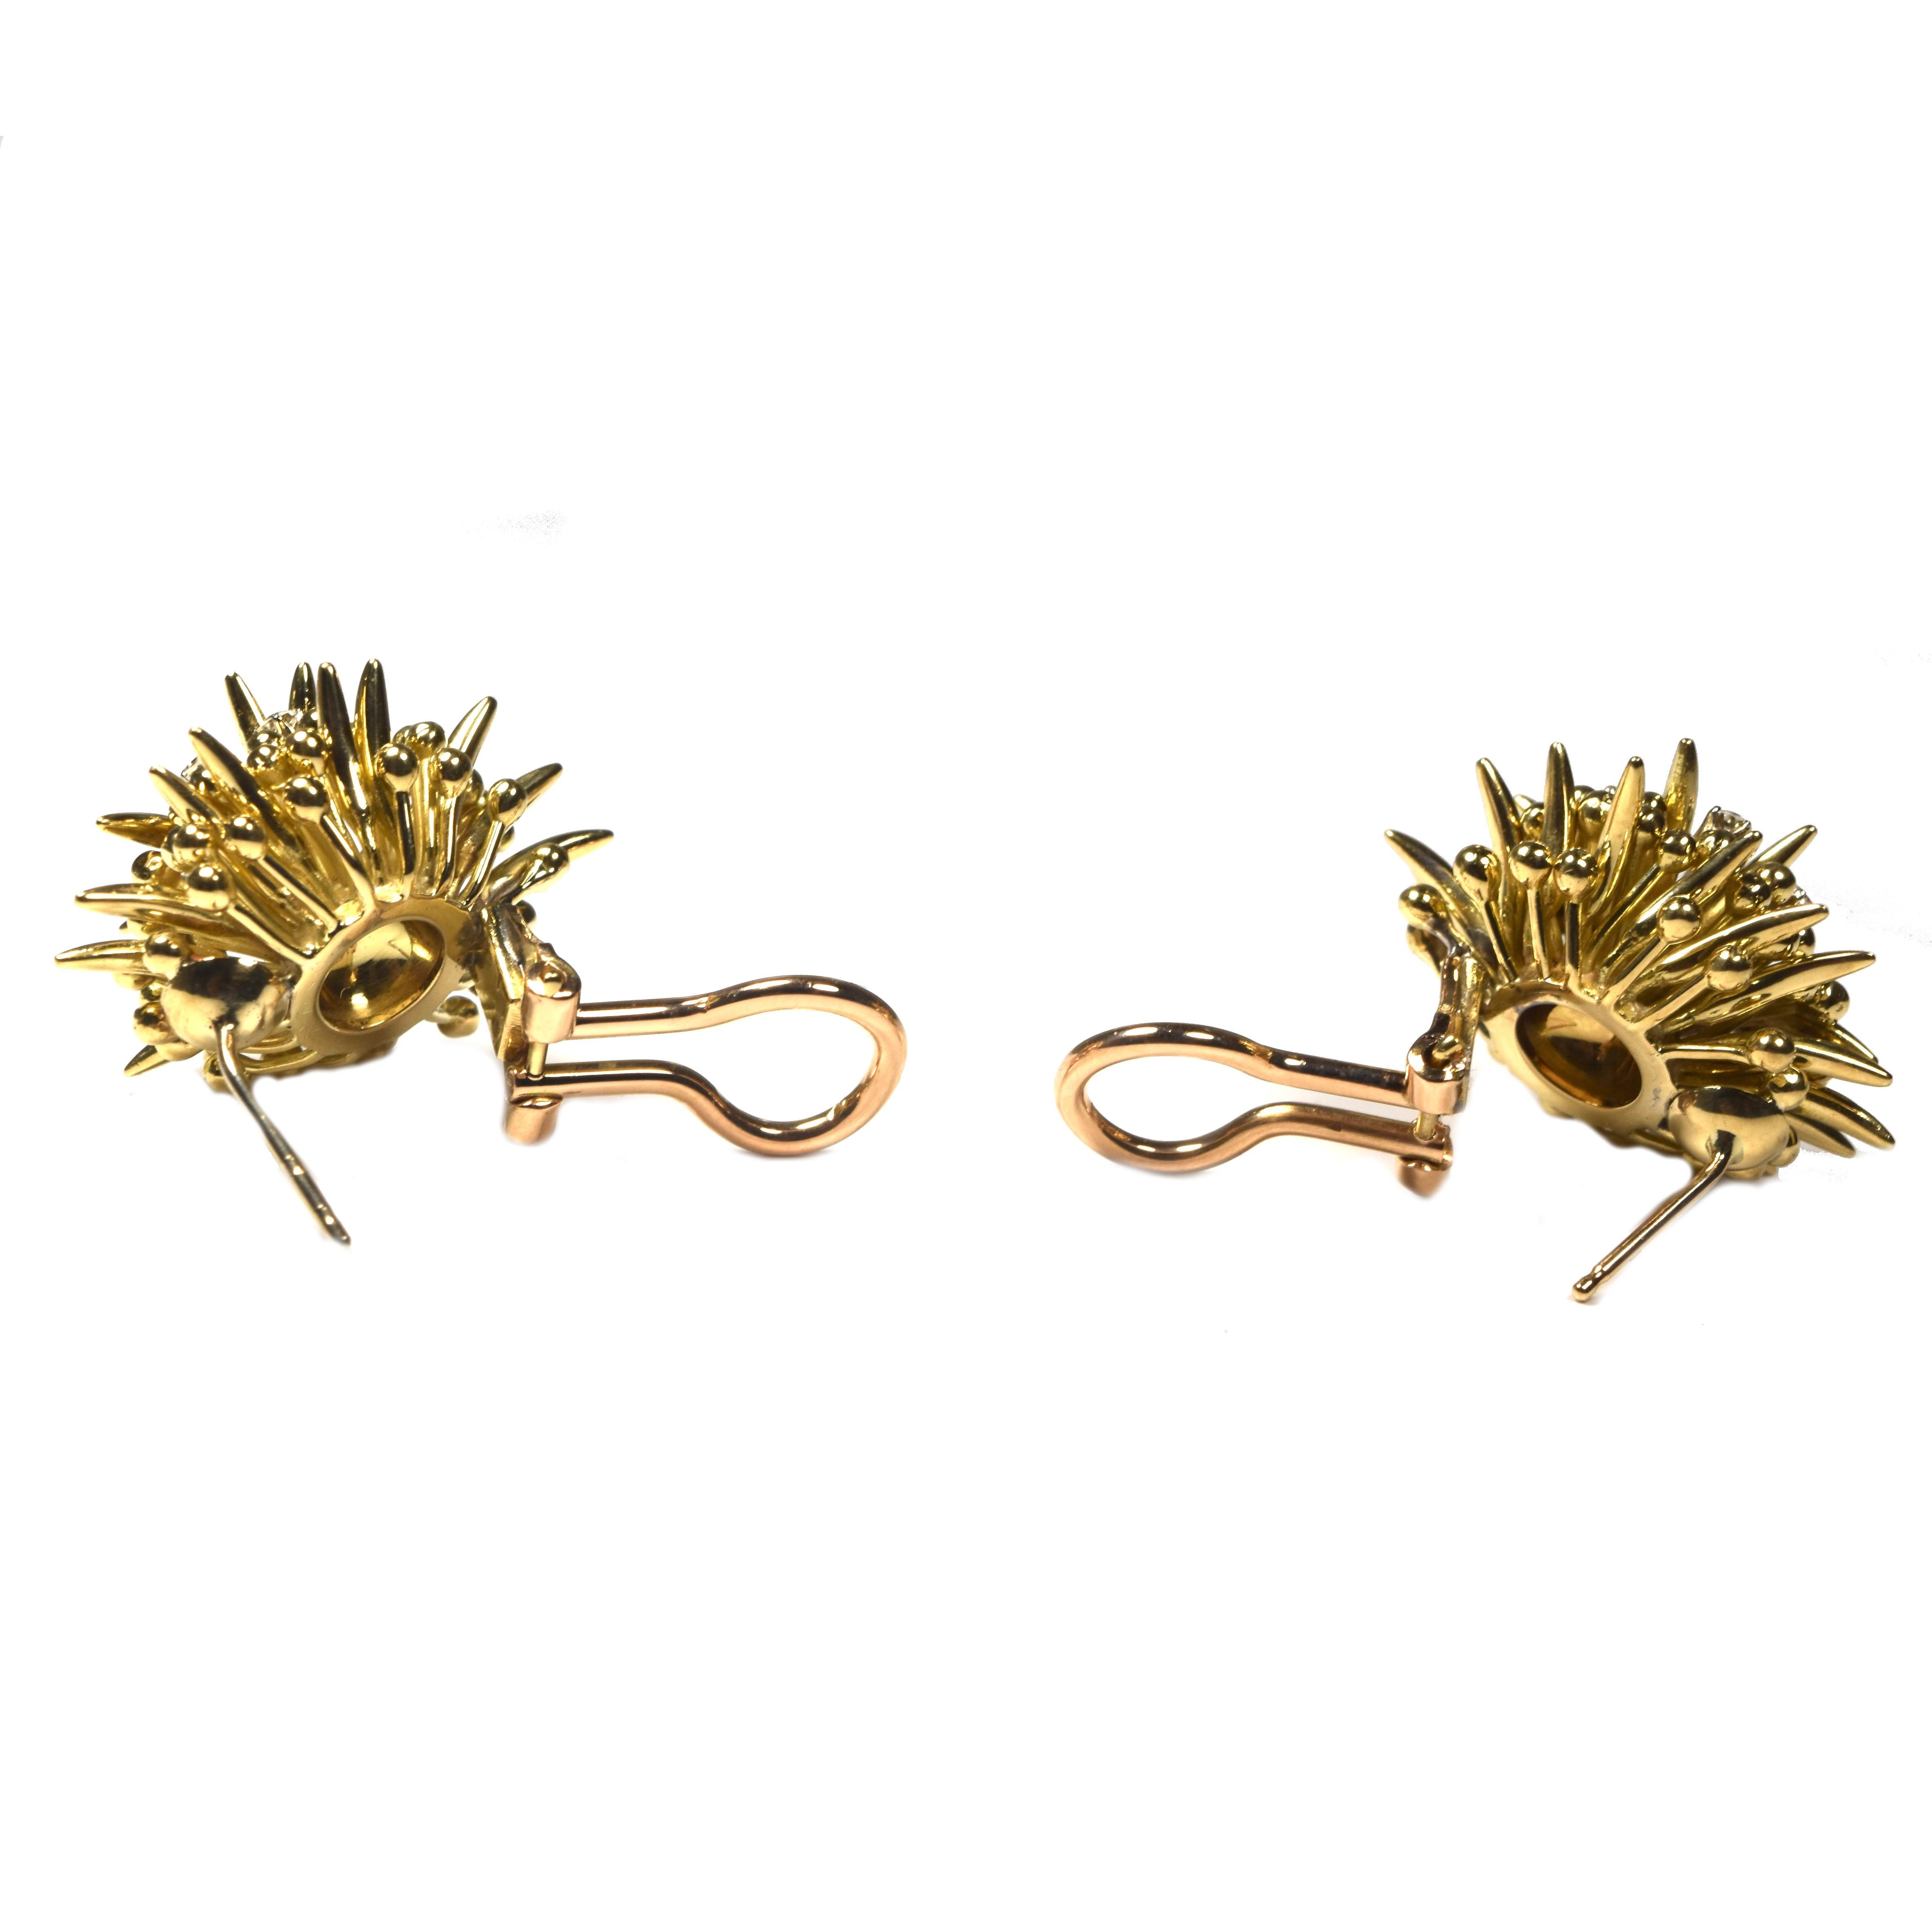 A whimsical and stylish Sea Anemone pair of earrings made by Tiffany & Co. in 18k Yellow Gold. 3 dimensional, very well crafted and absolutely original, these earrings have a unique look, perfect to be worn with almost any piece of clothing to